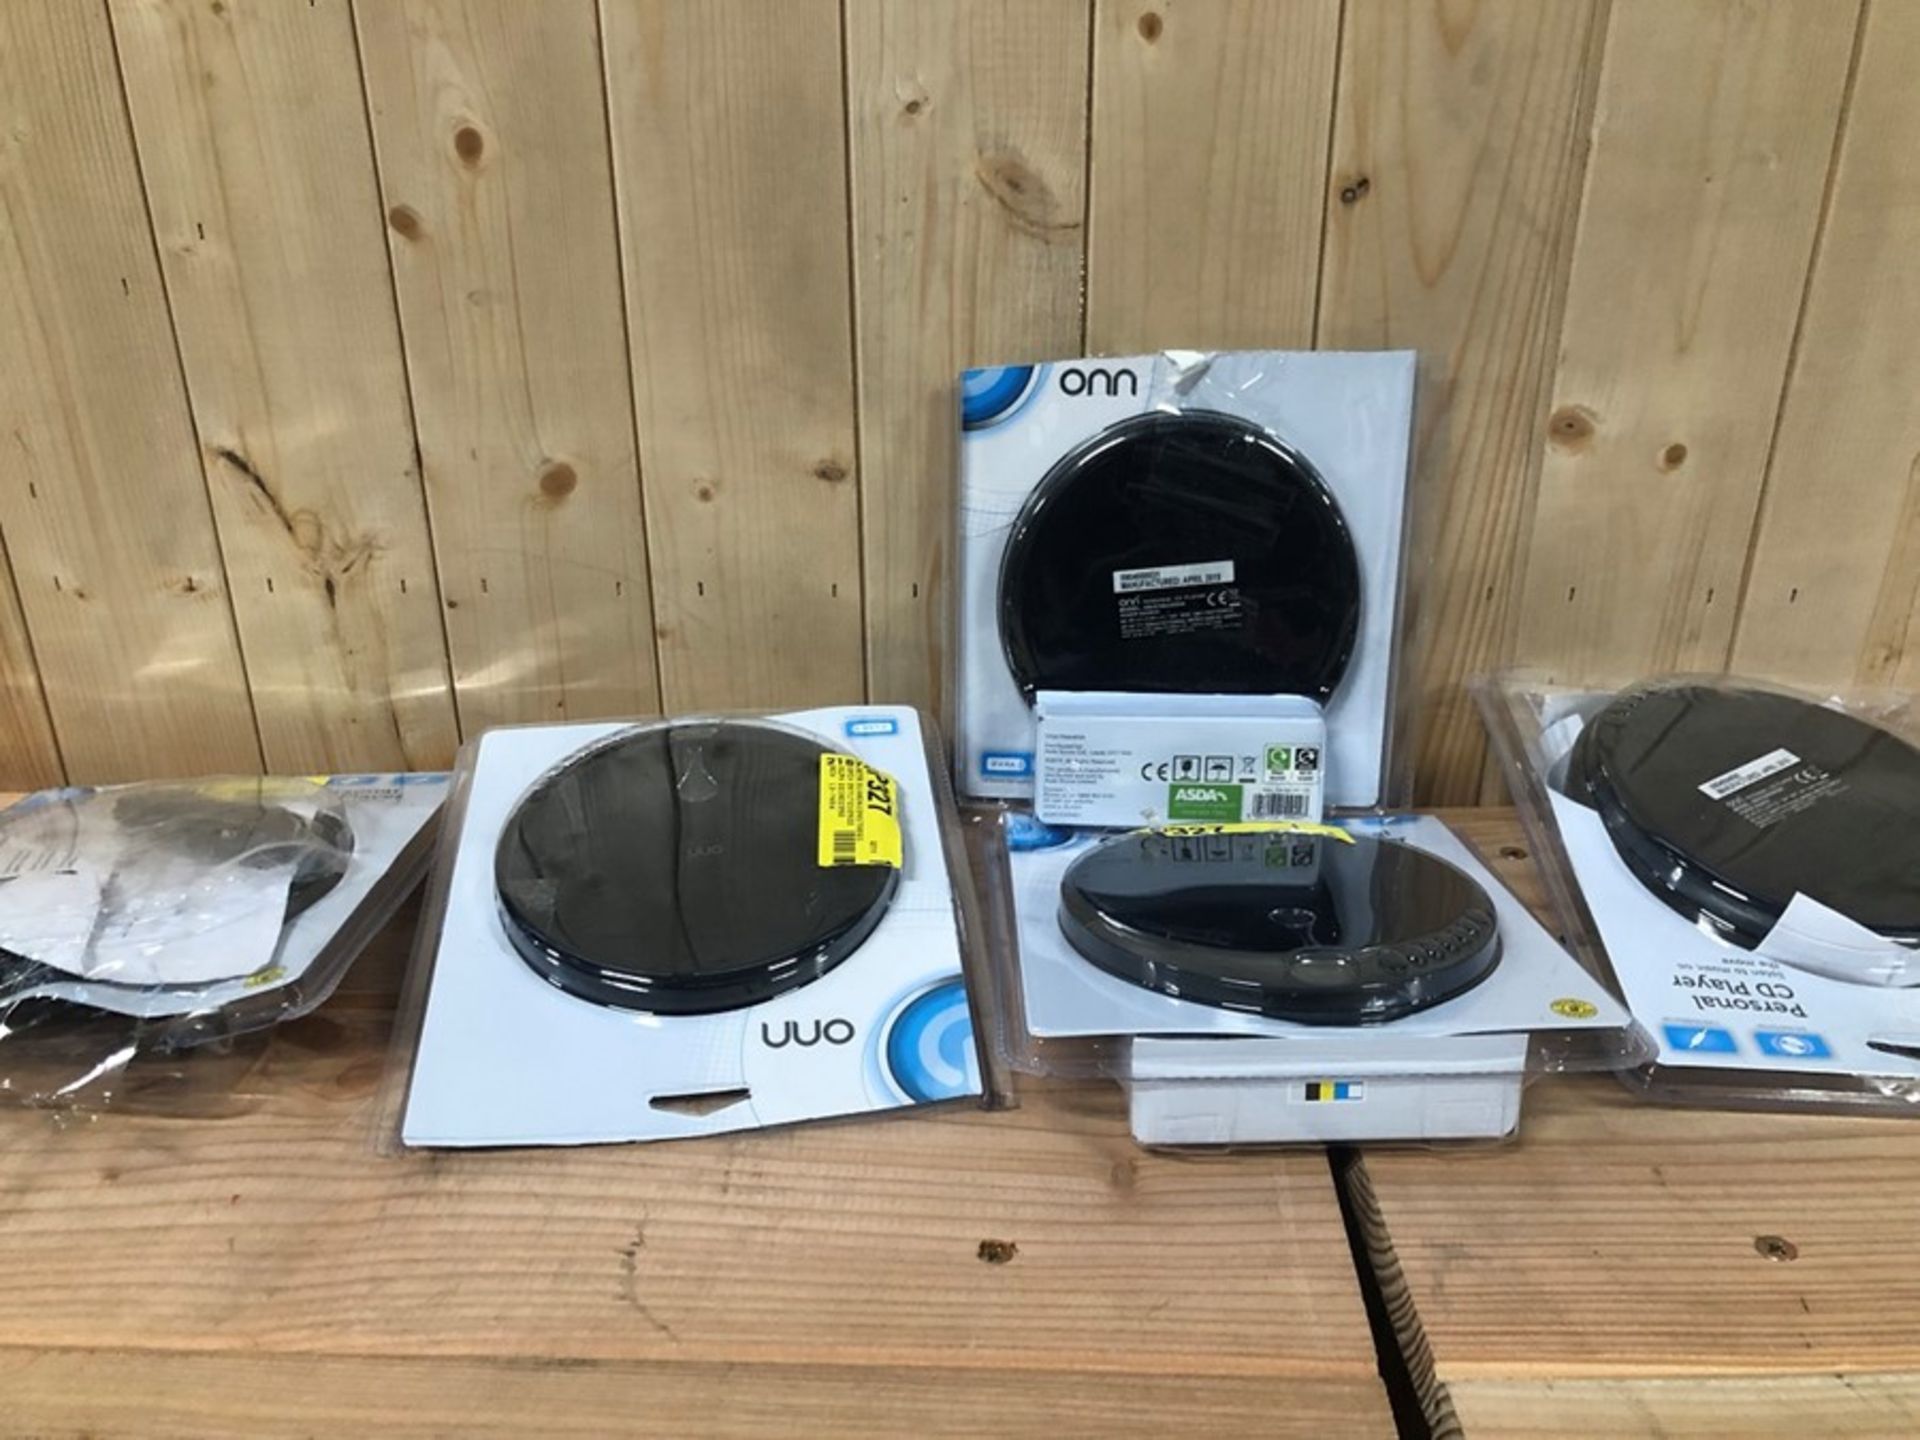 1 LOT TO CONTAIN 5 BAGGED AND UNTESTED ONN CD PLAYERS / BL - 8740 (PUBLIC VIEWING AVAILABLE)